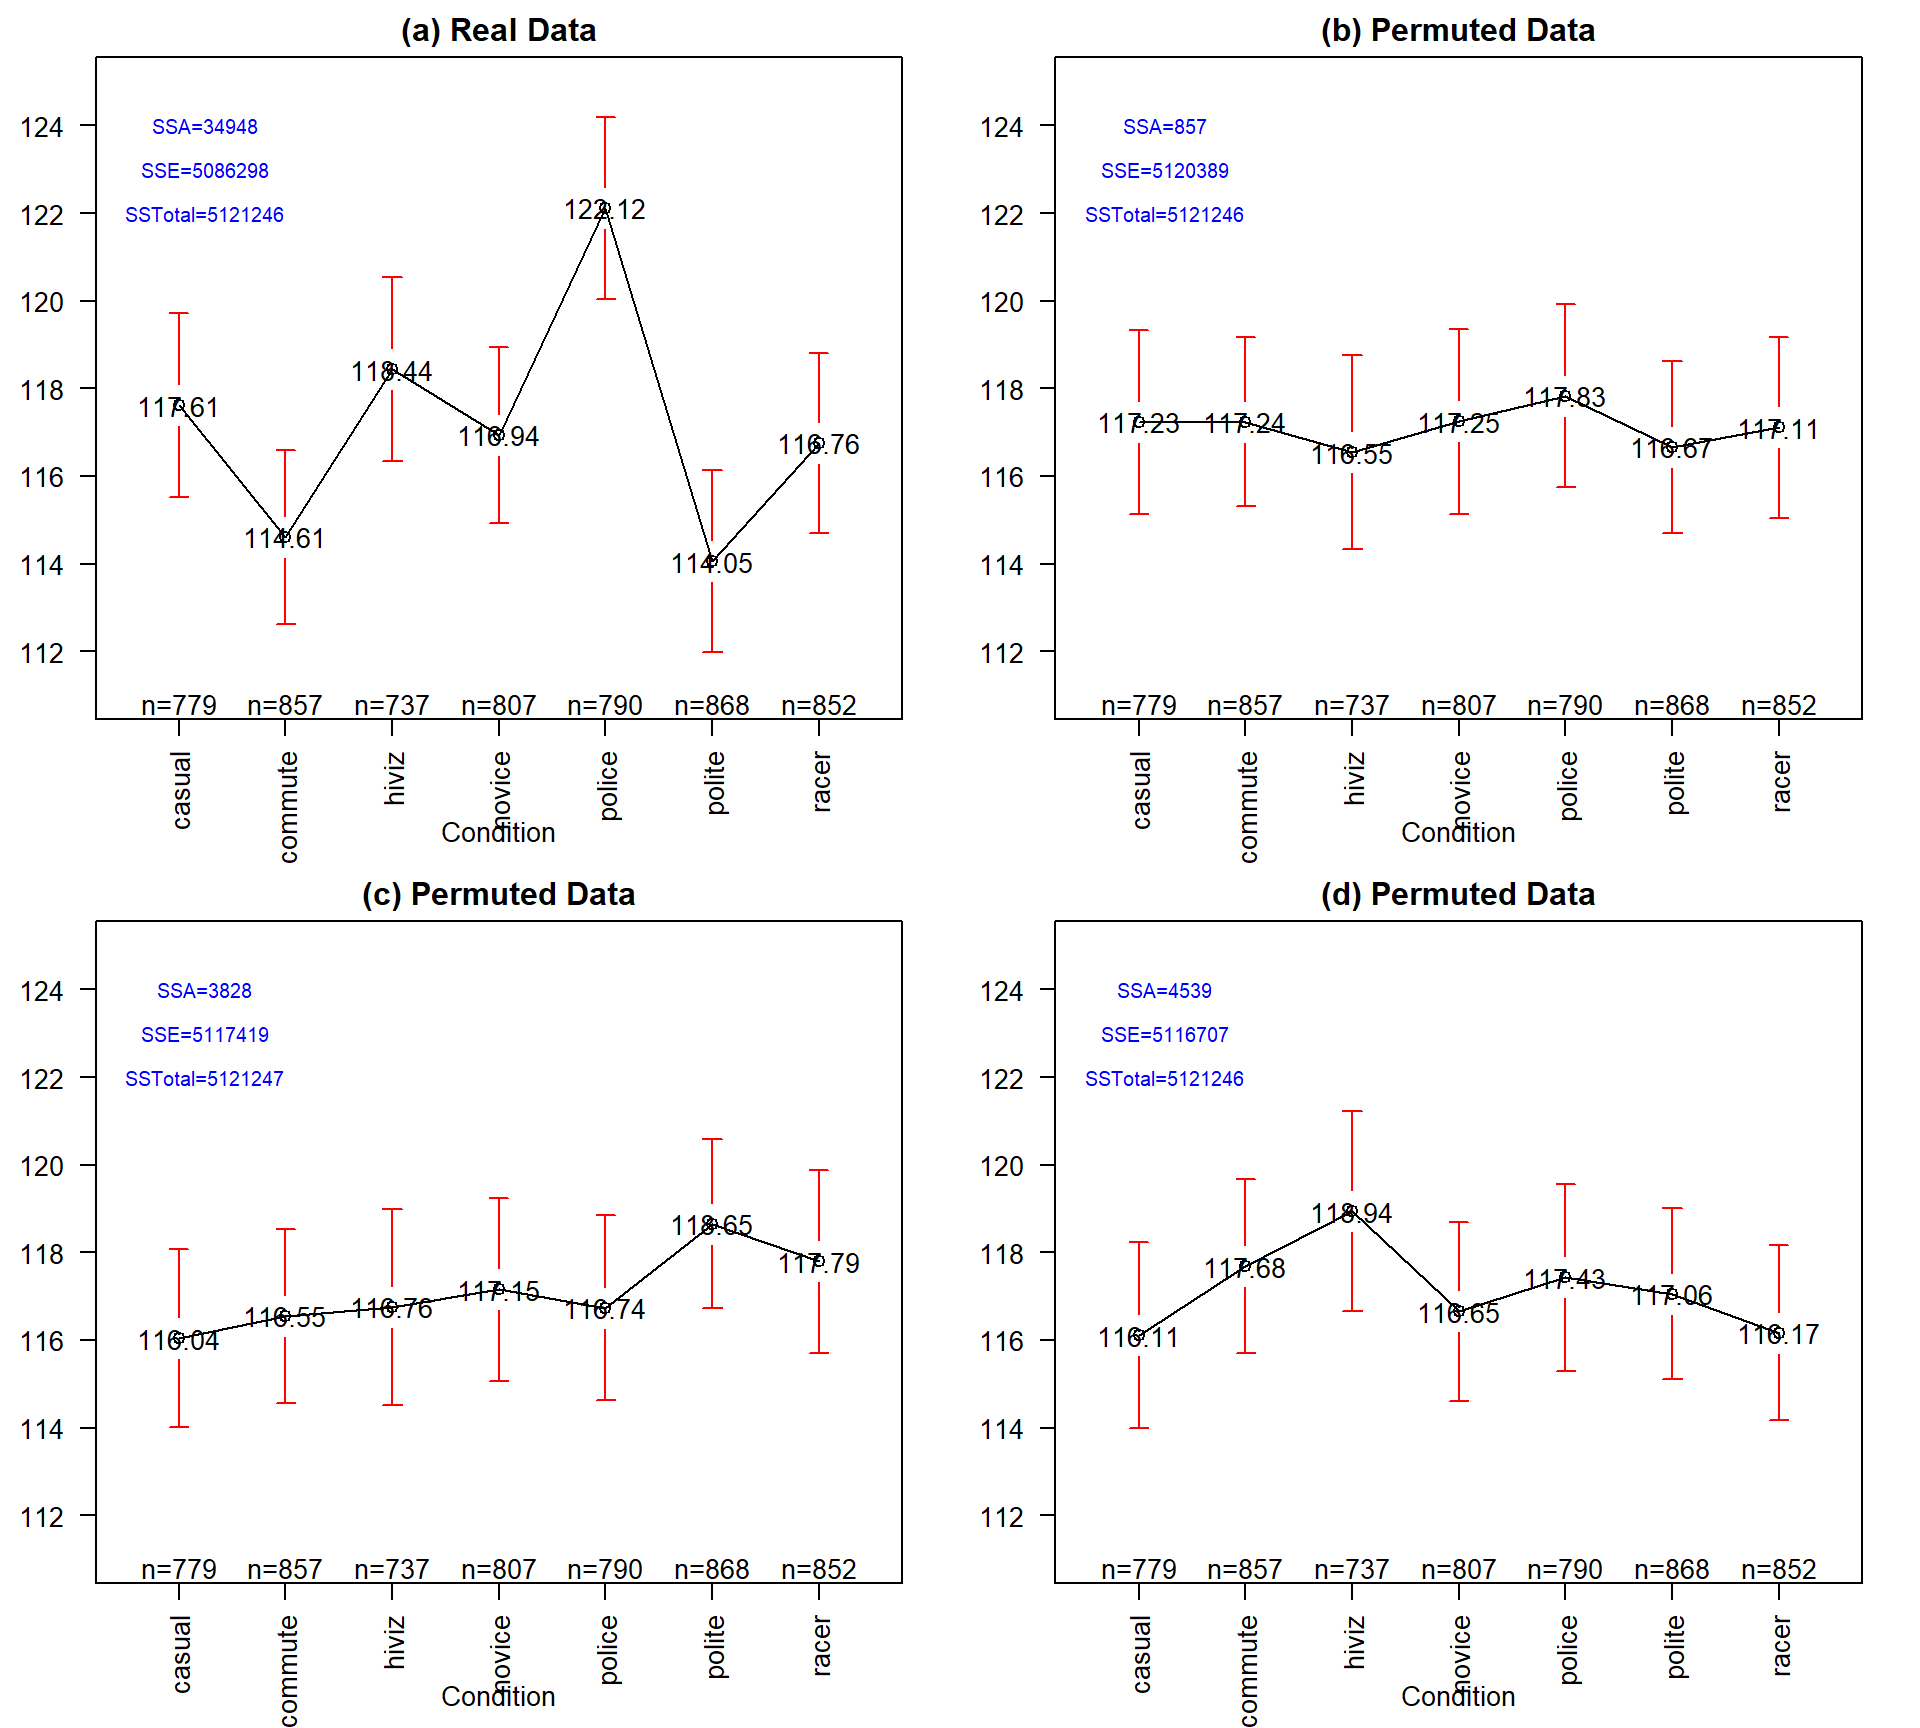 Plot of means and 95% confidence intervals for the three groups for the real overtake data (a) and three different permutations of the outfit group labels to the same responses in (b), (c), and (d). Note that SSTotal is always the same but the different amounts of variation associated with the means (SSA) or the errors (SSE) changes in permutation.